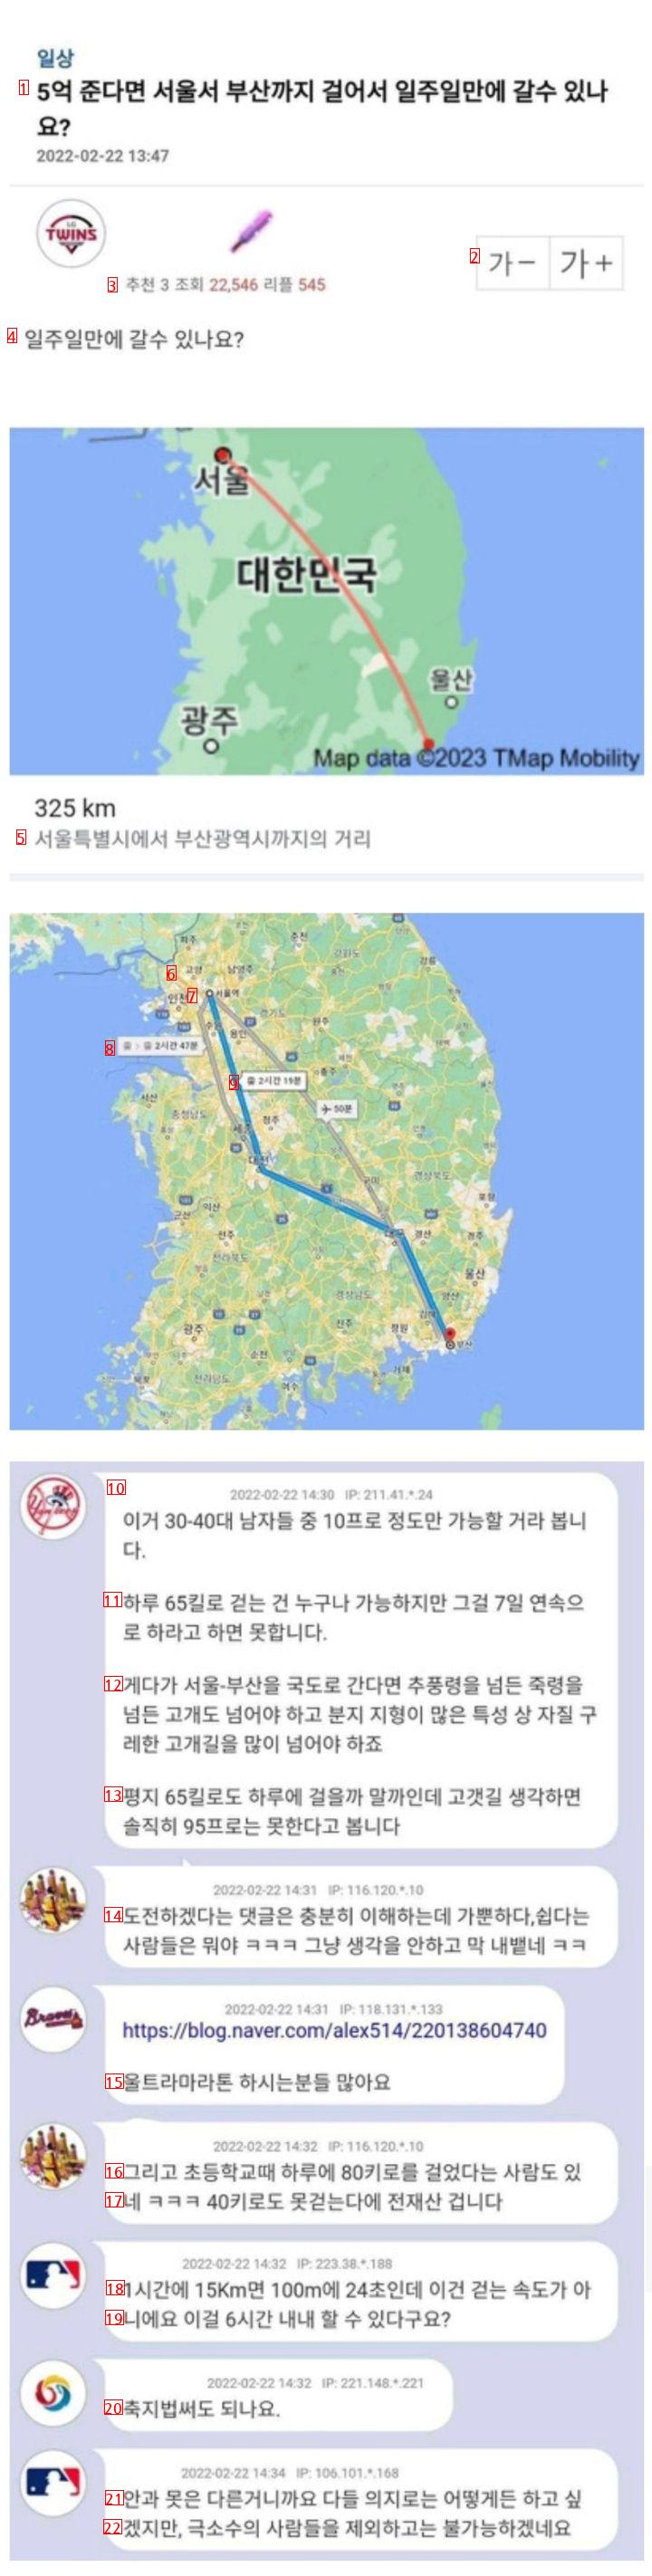 If you succeed in a week's cut from Seoul to Busan, it will be 500 million won